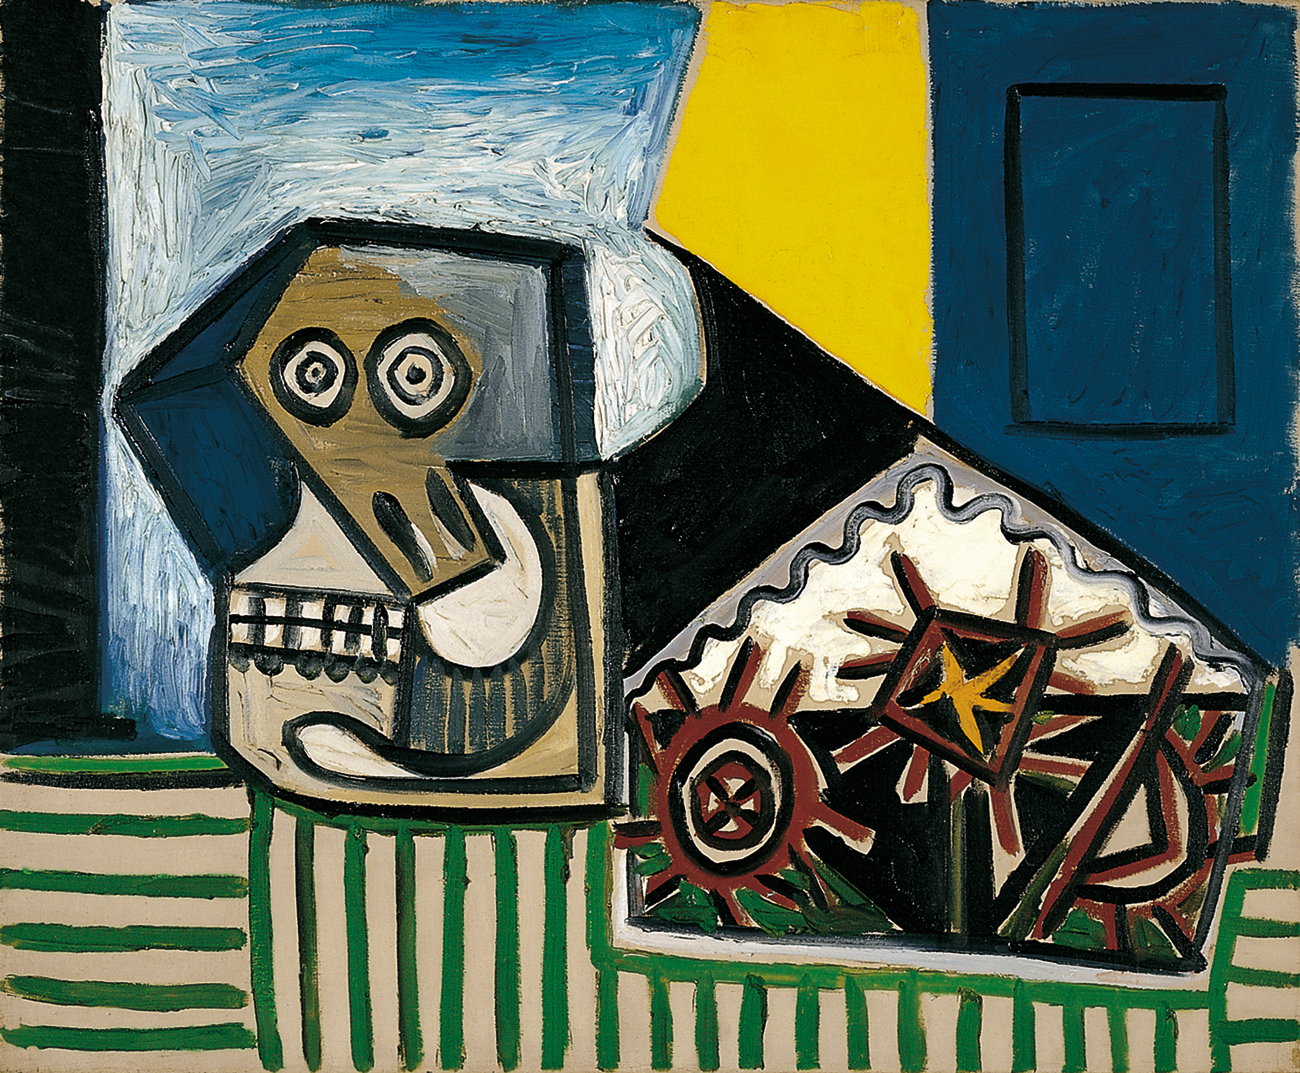 Pablo Picasso, Still life with skull and three sea urchins, 1947